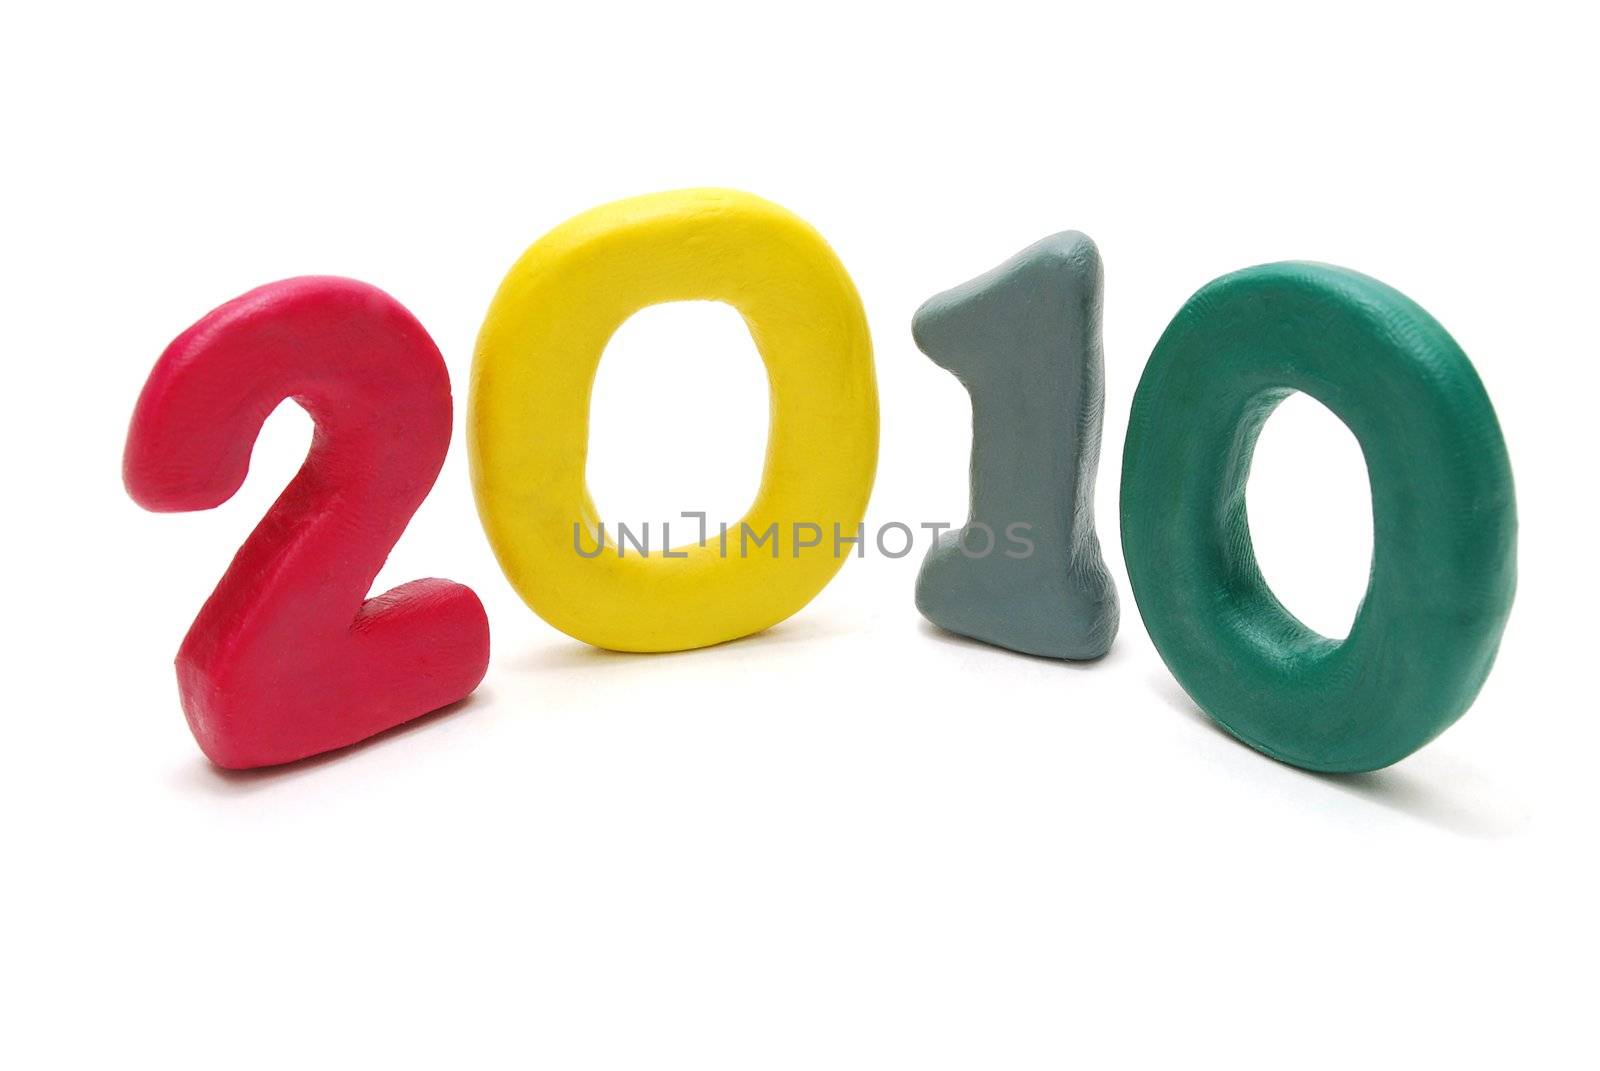 3D New Year Text 2010 Made of Colored Plasticine Isolated on White Background